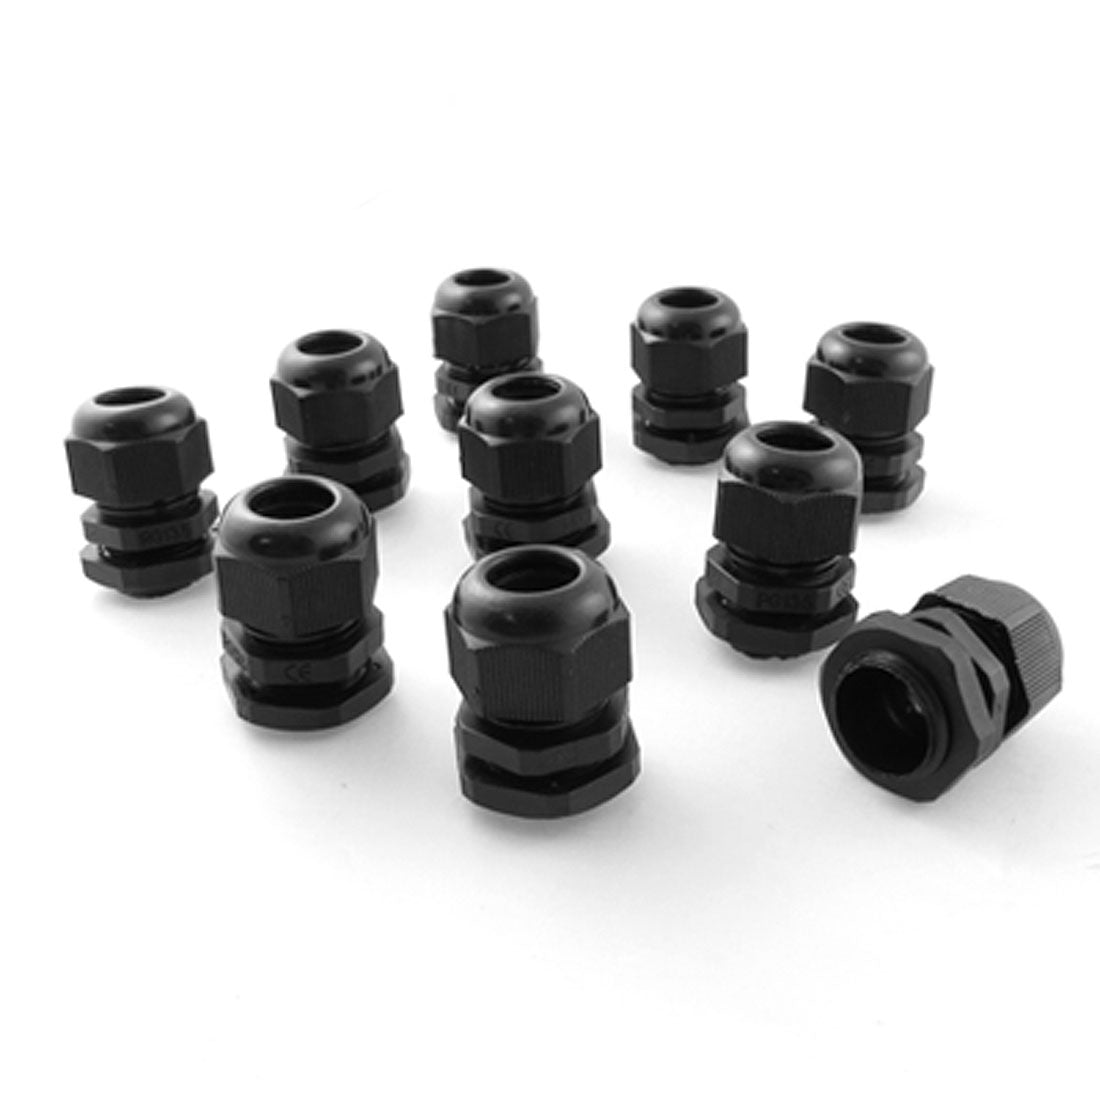 uxcell Uxcell 10 Pcs PG13.5 Black Plastic Waterproof Cable Glands Connectors